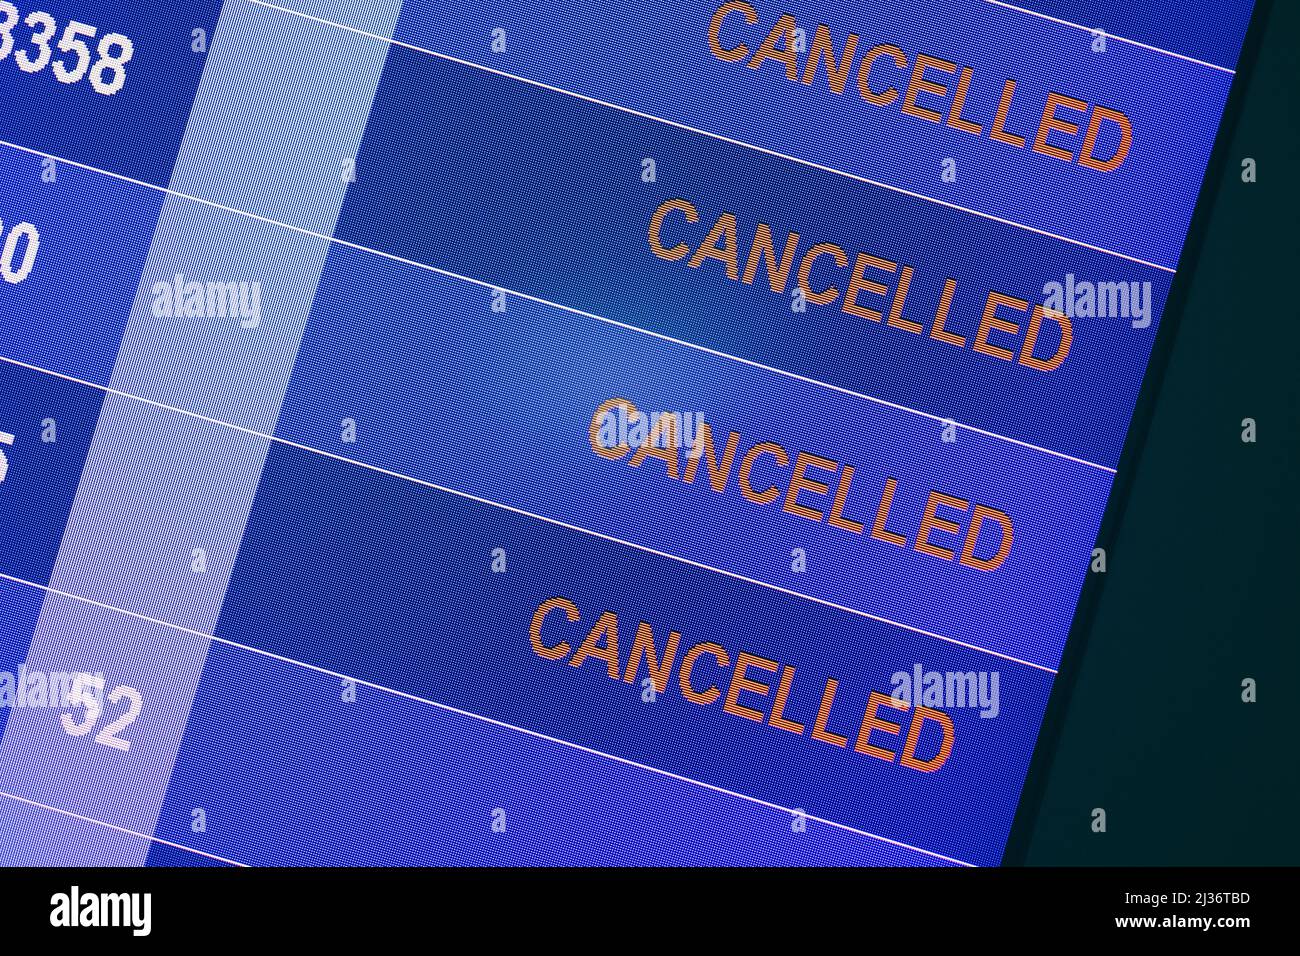 Airpot Flight Boarding Schedule show Cancel stop flying travel Problem Display. Stockfoto